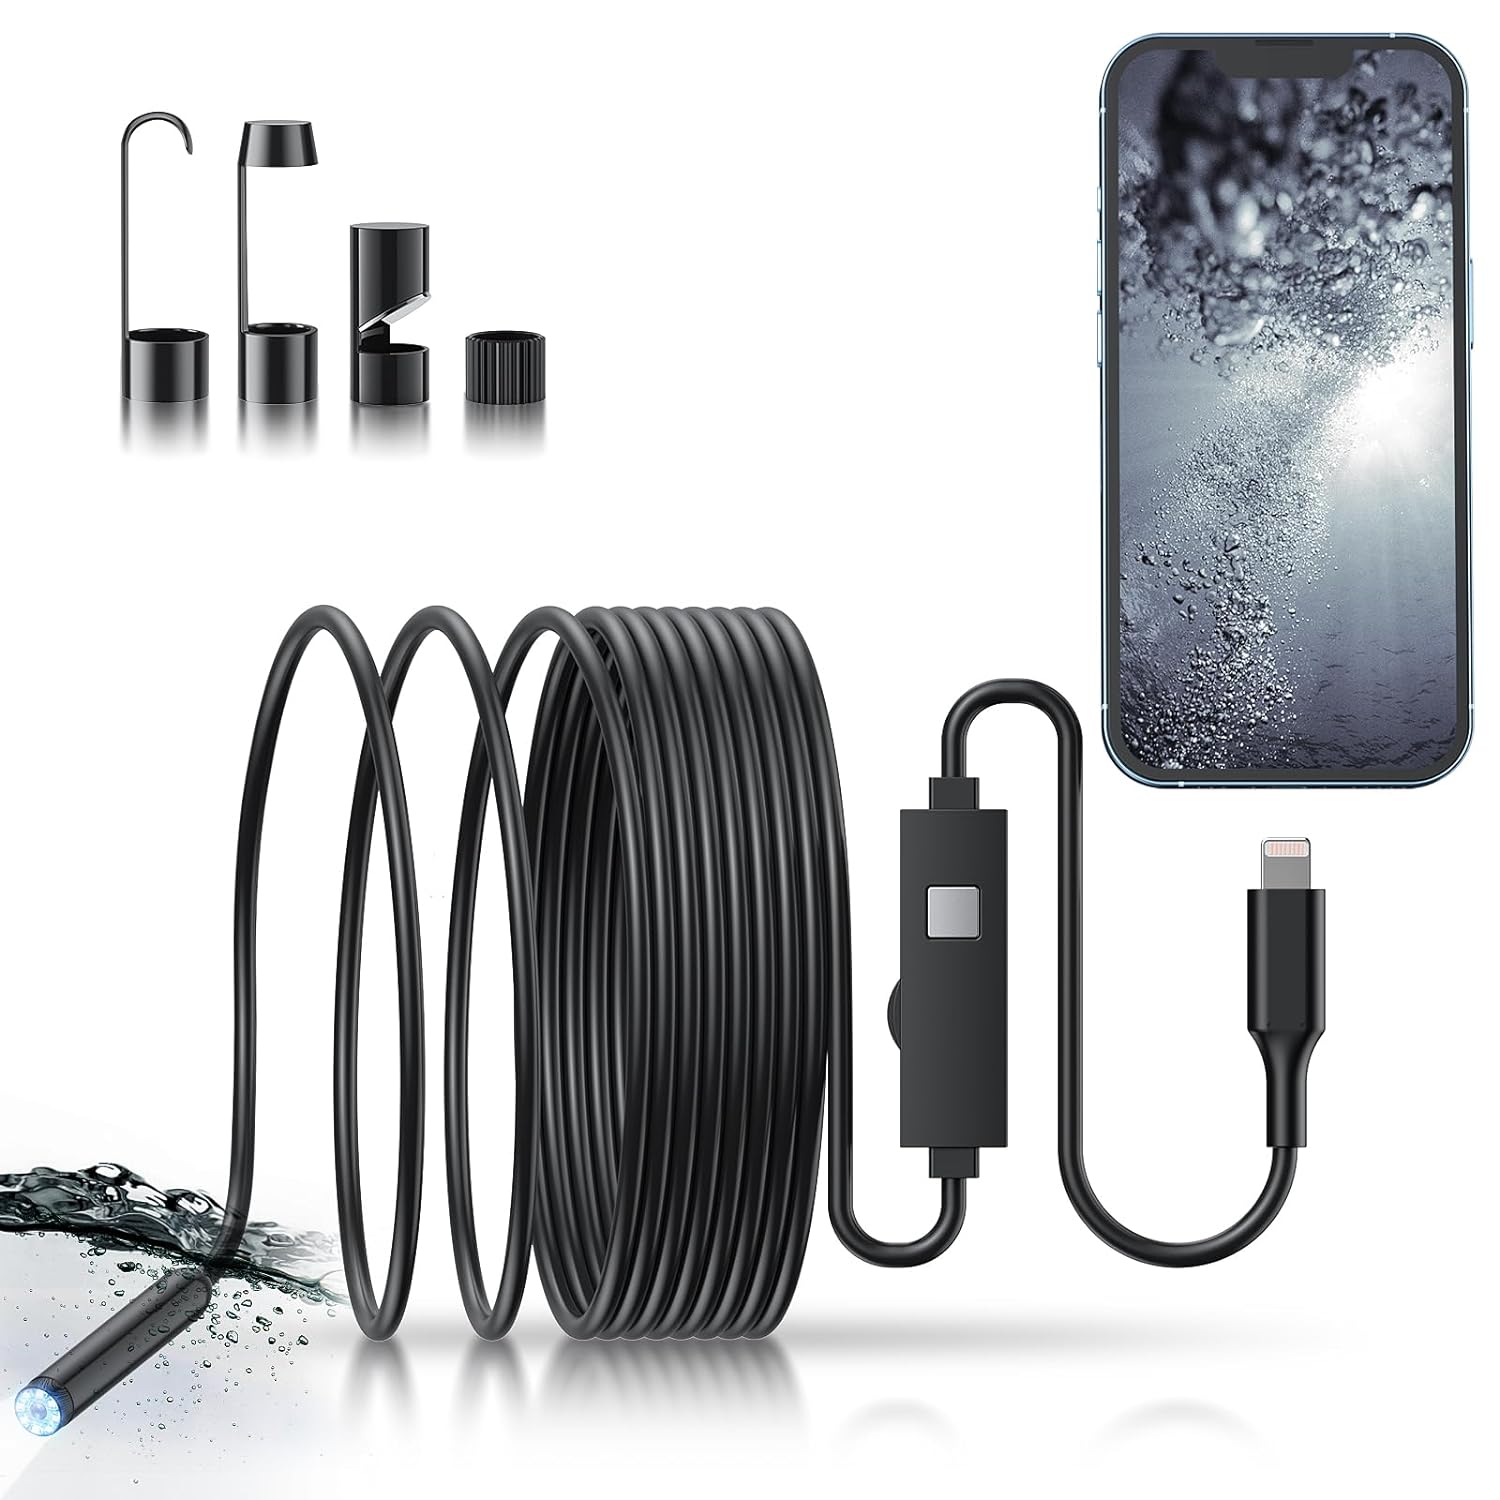 Wireless Waterproof IP67 Endoscope Inspection Camera For iPhone 8 Plus X  IOS US